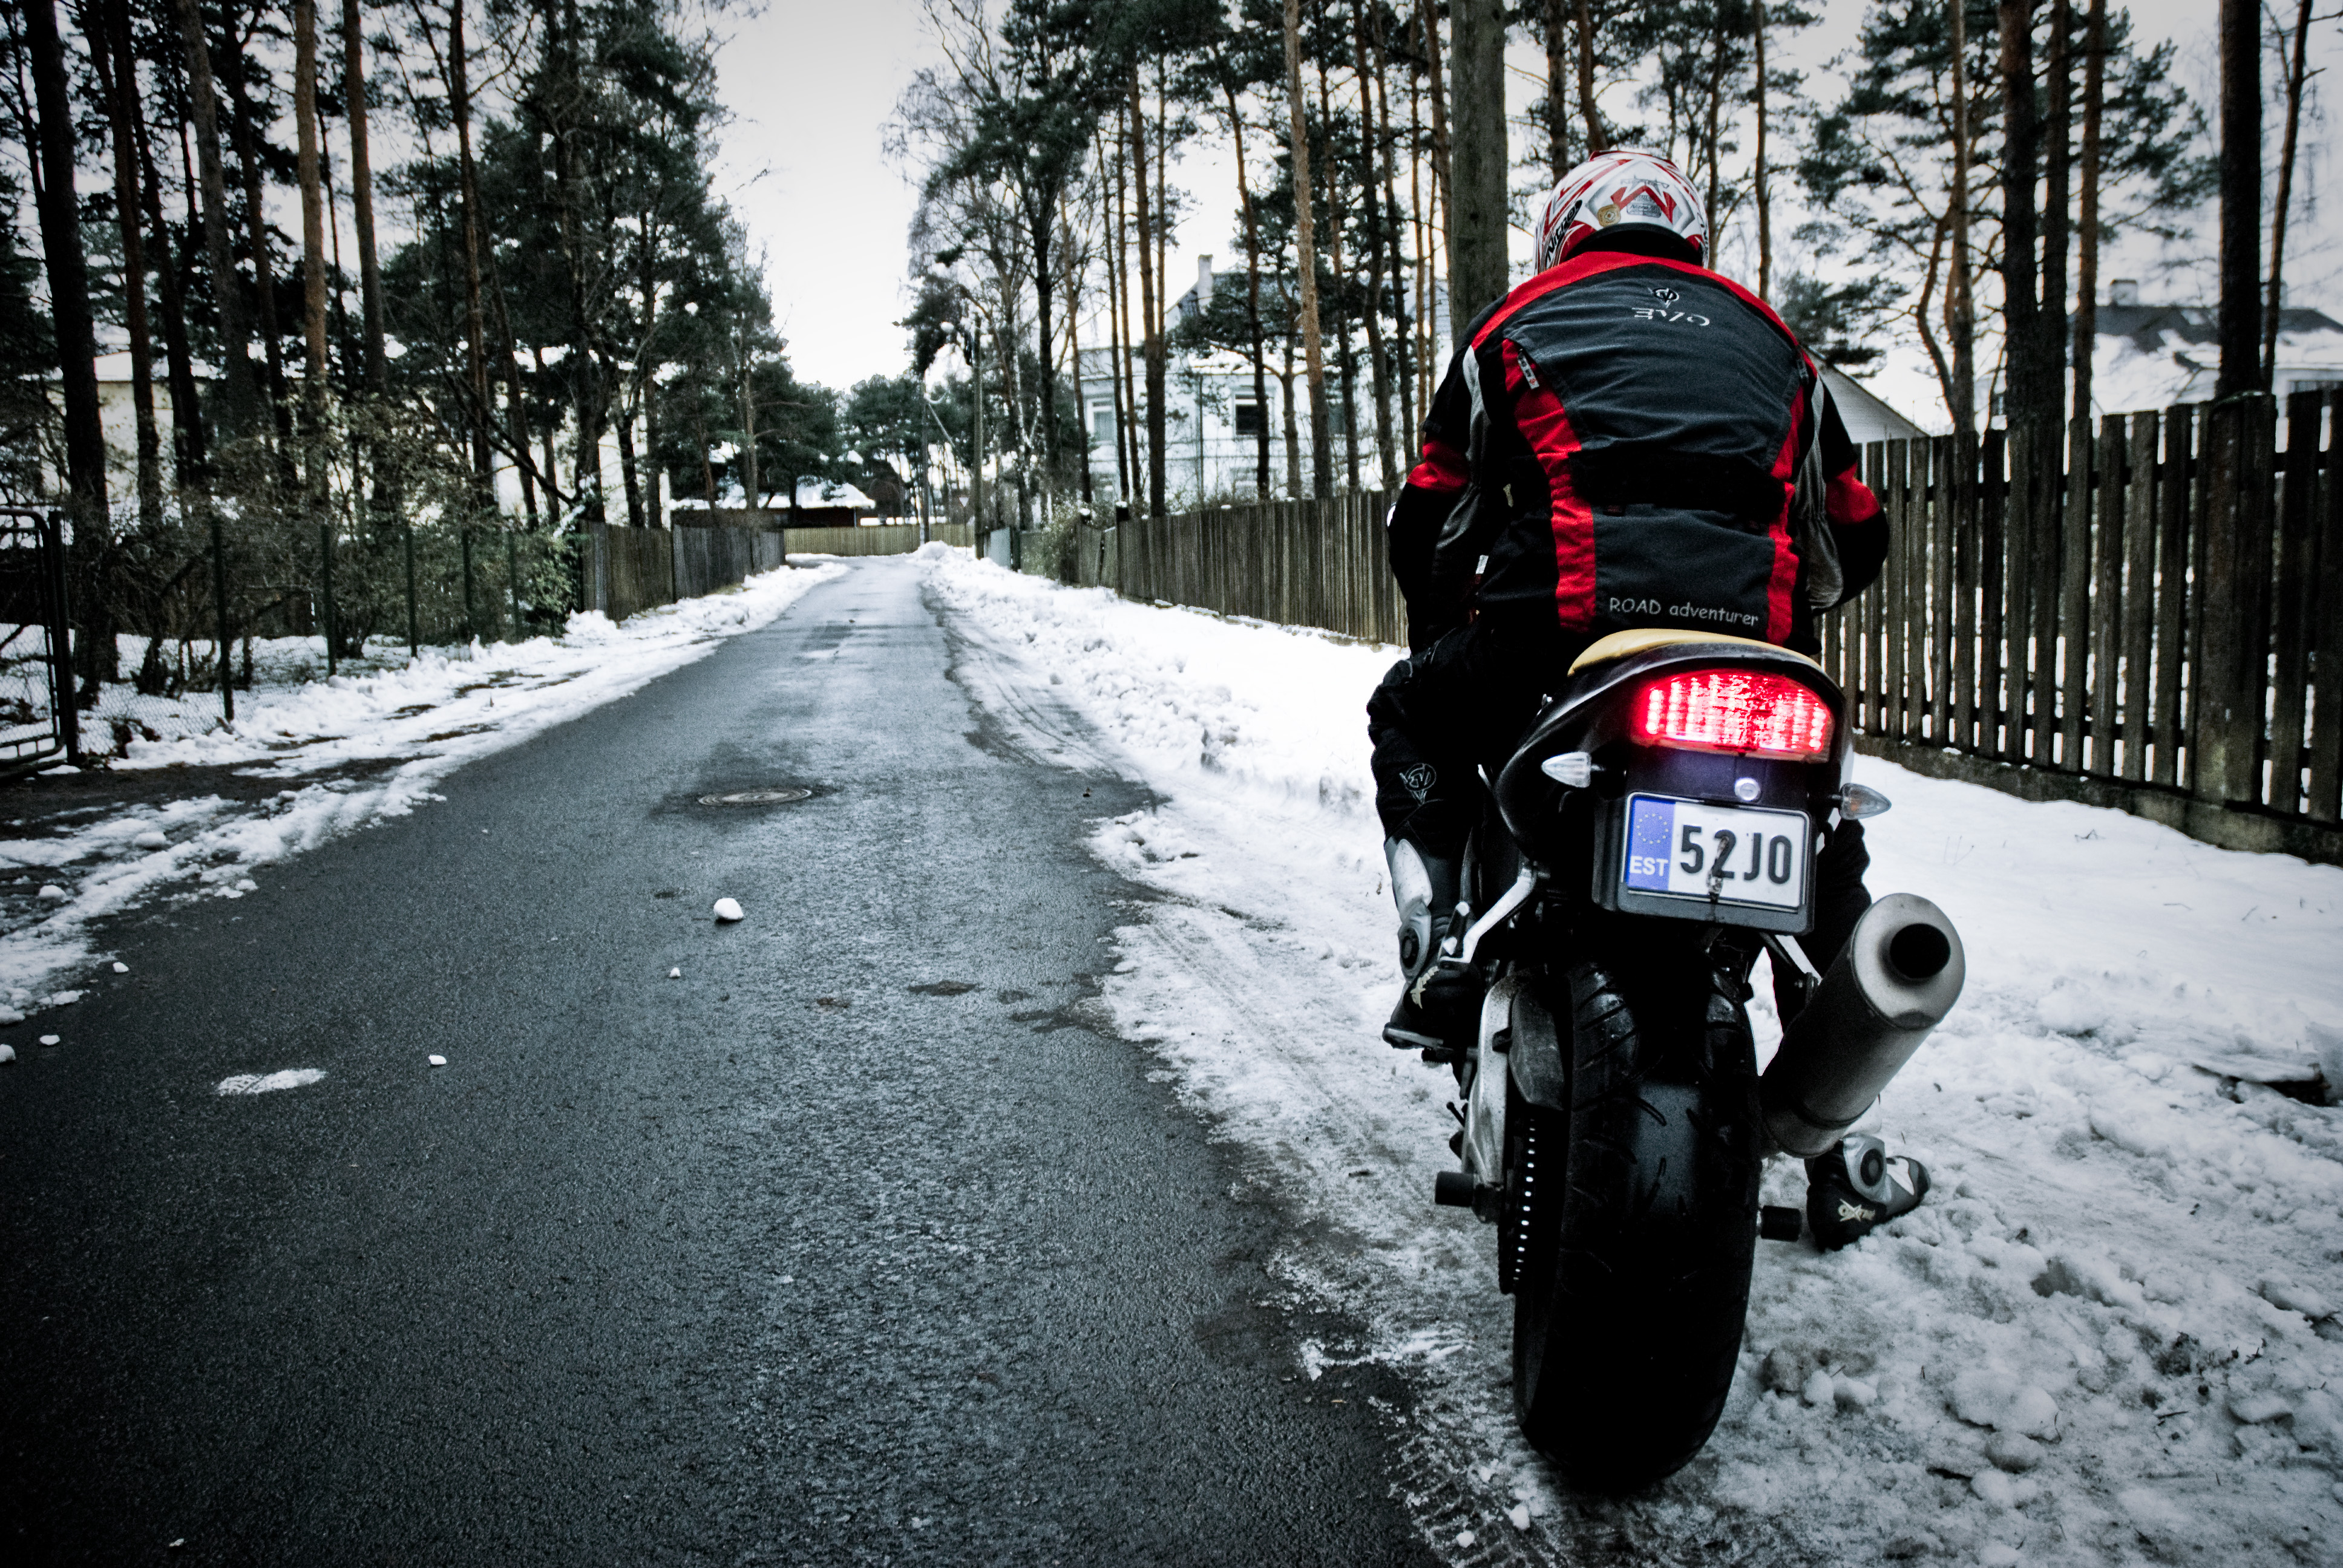 Riding a Motorcyle in the Snow